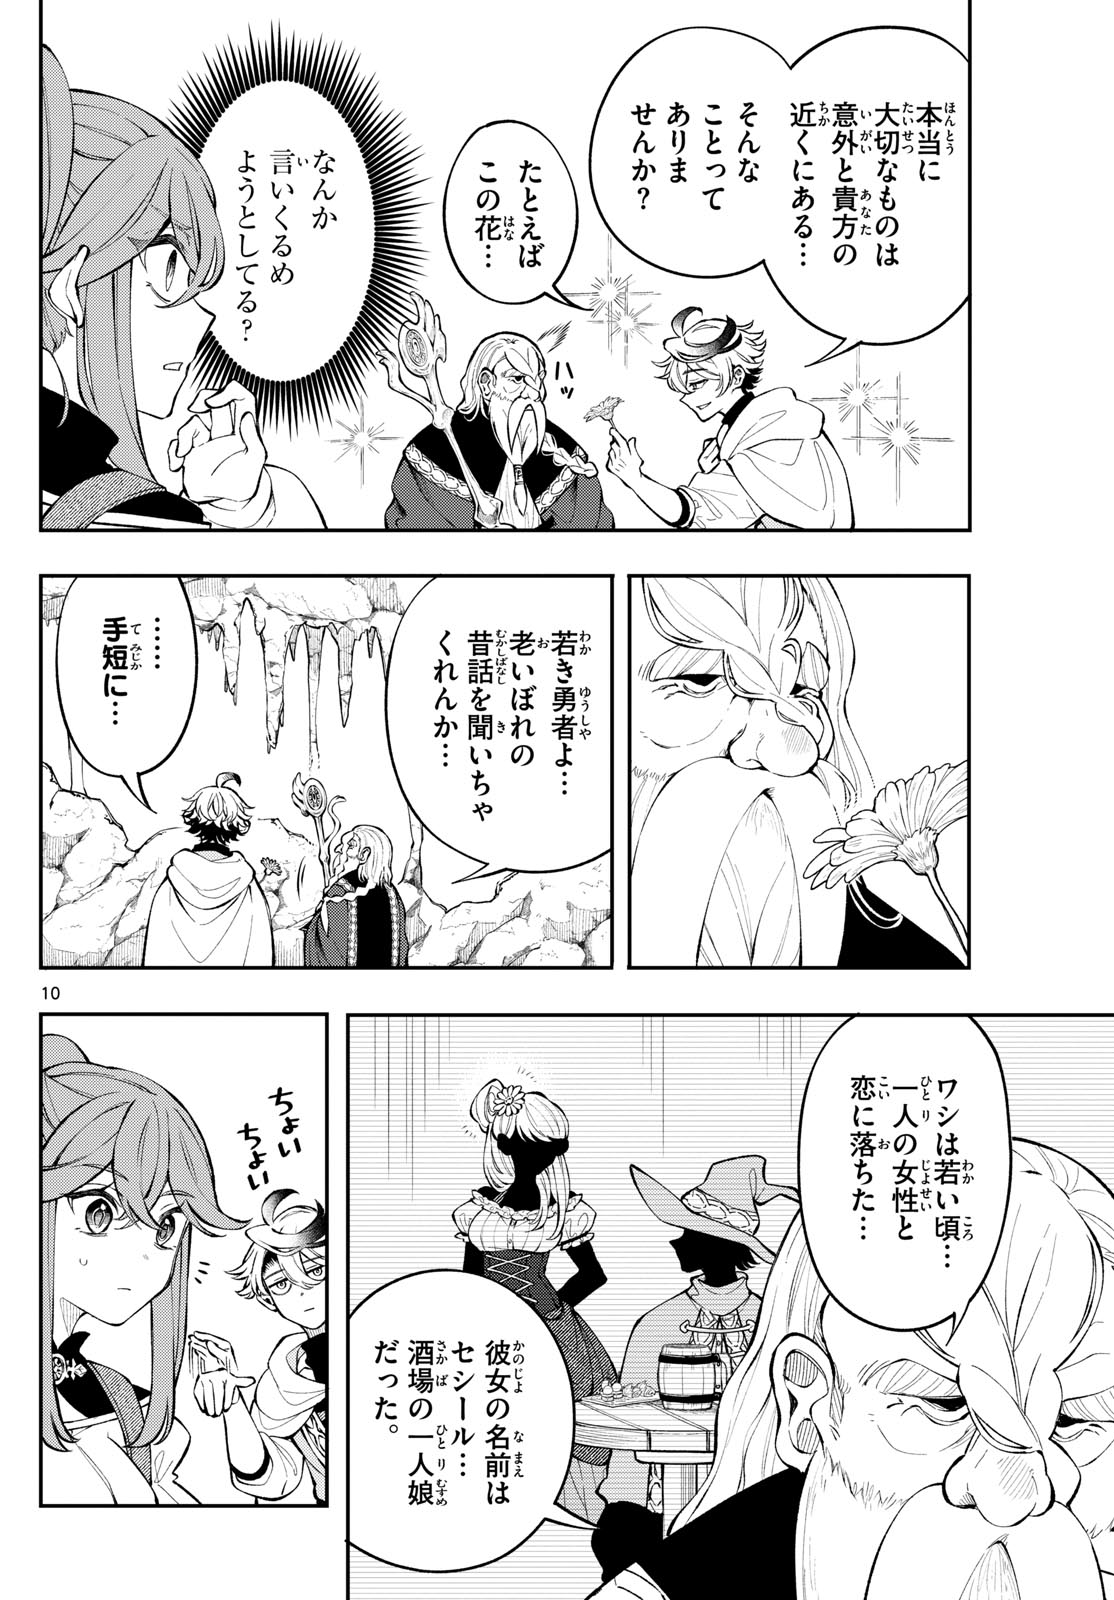 Albus Changes the World 廻天のアルバス 第4話 - Page 10